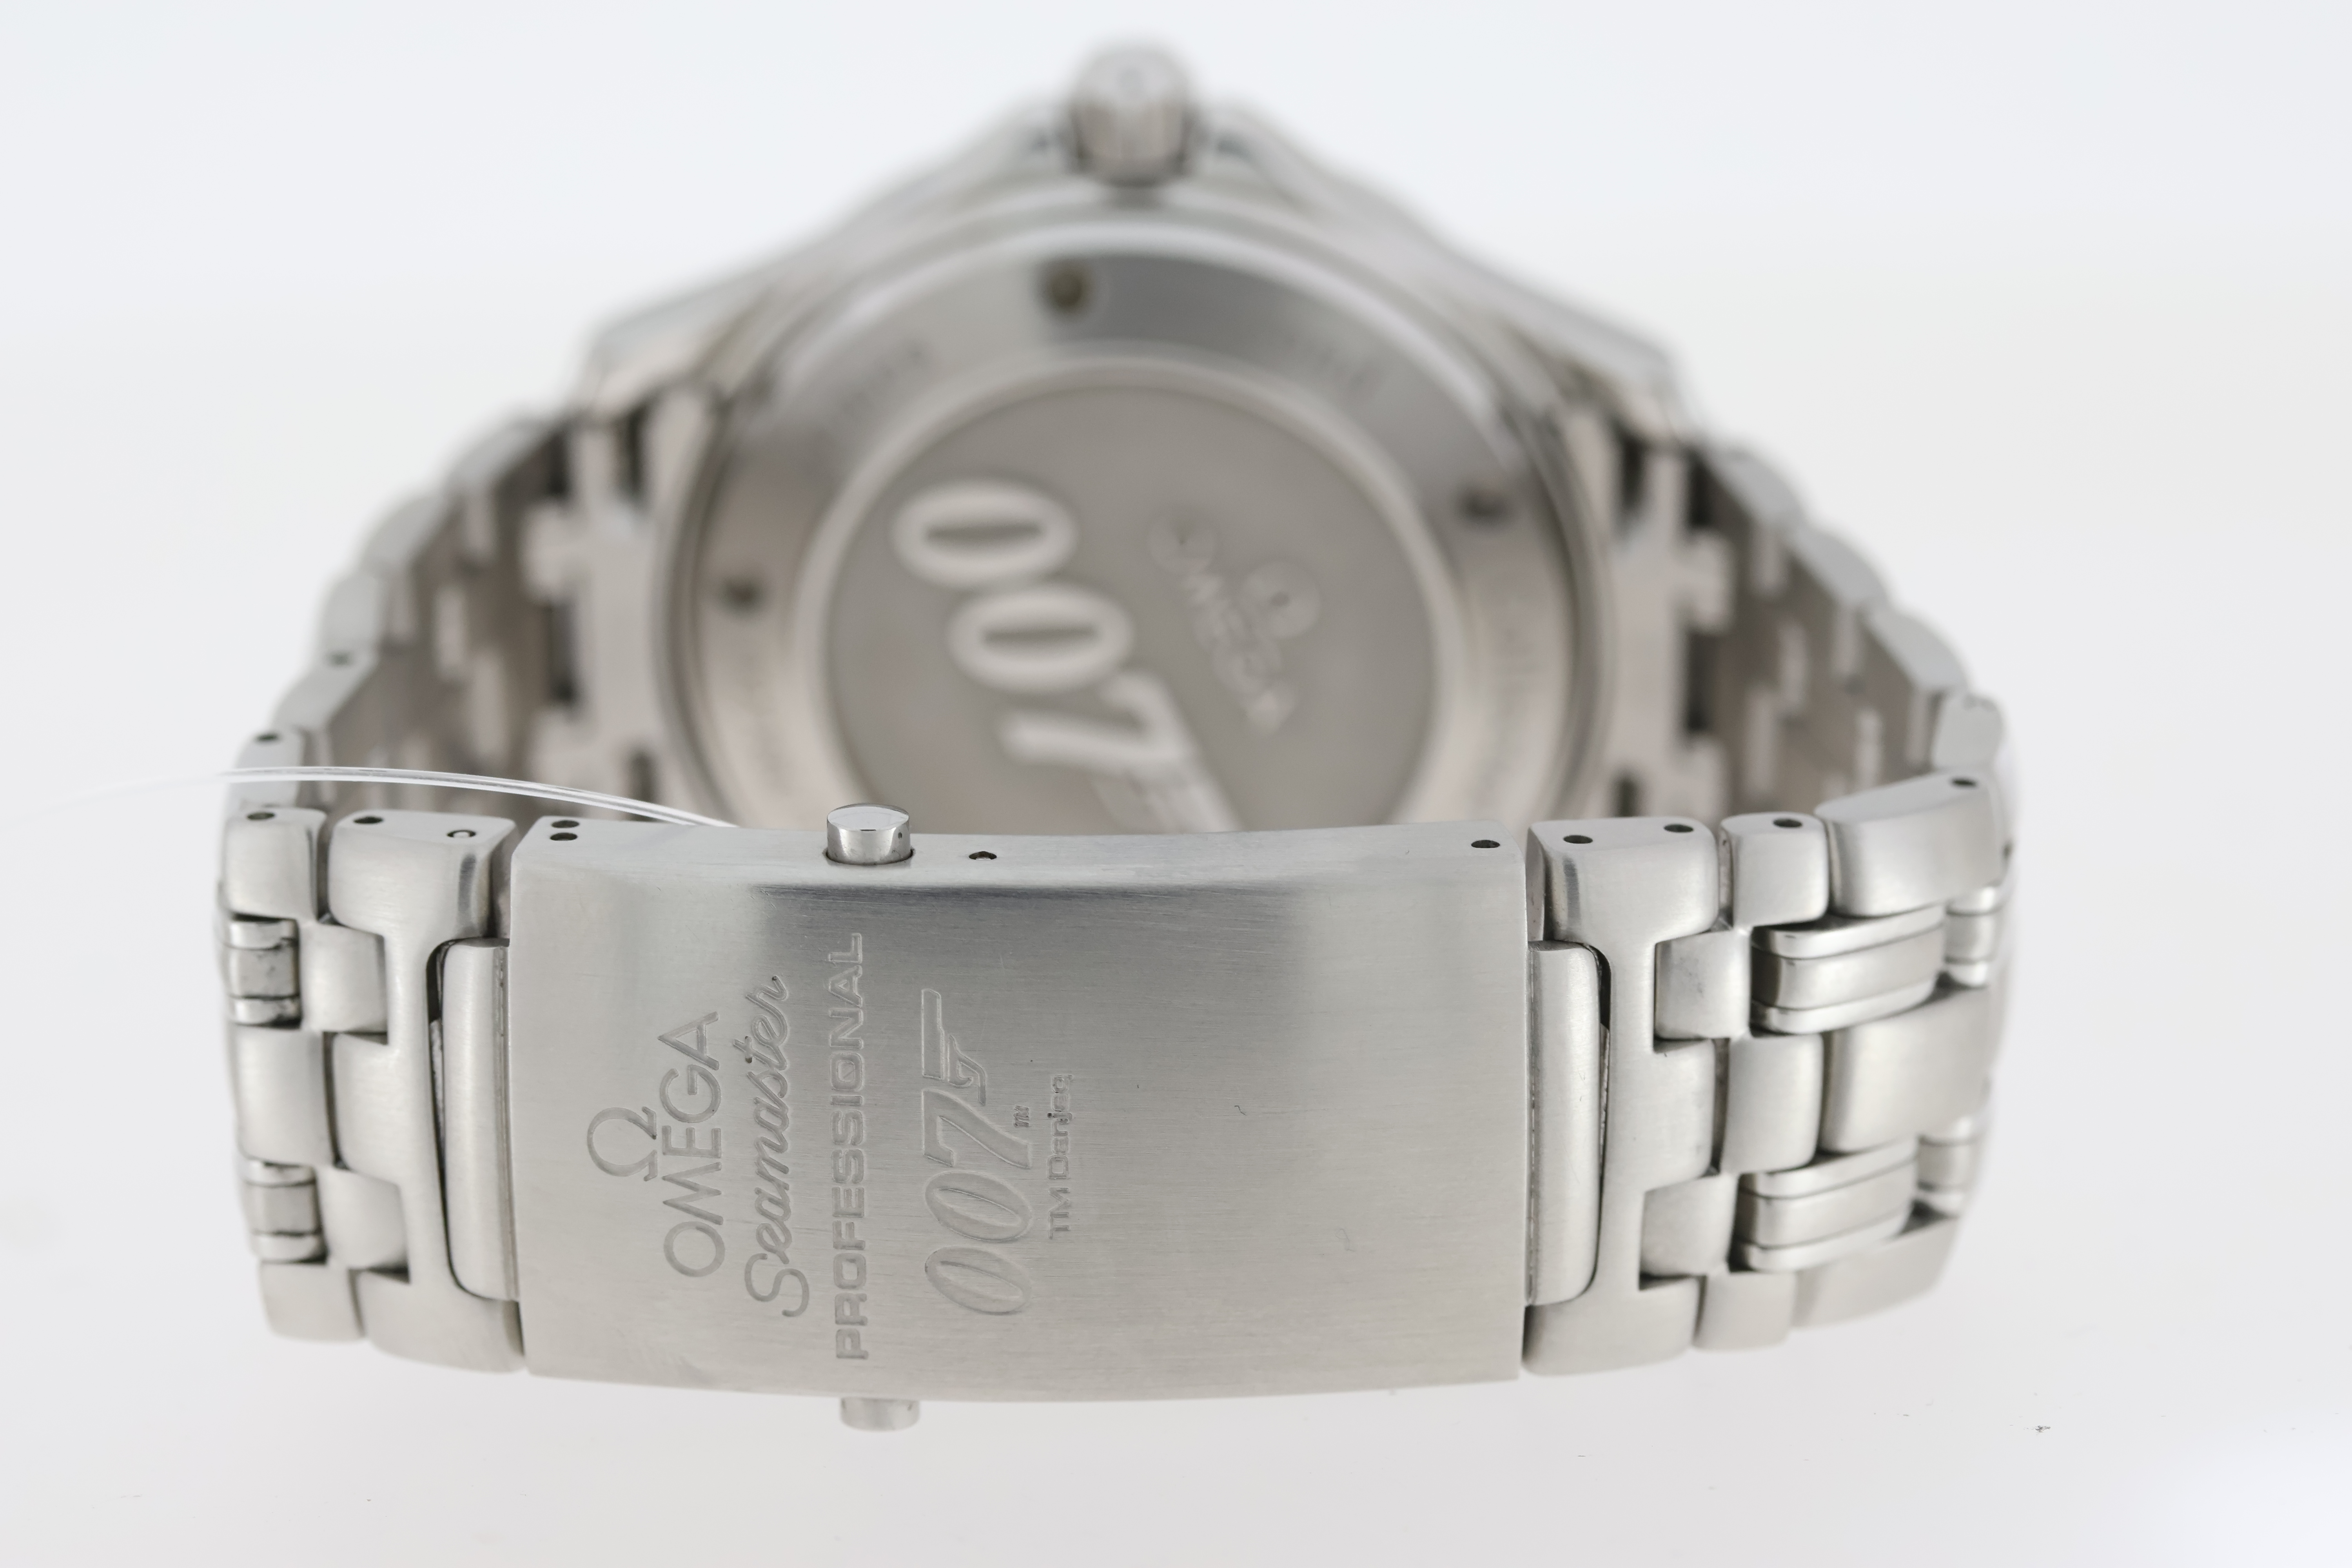 Omega Seamaster 007, James Bond Ltd Edition 212.30.41.20.01.001 Co-Axial Chronometer Automatic with - Image 7 of 9